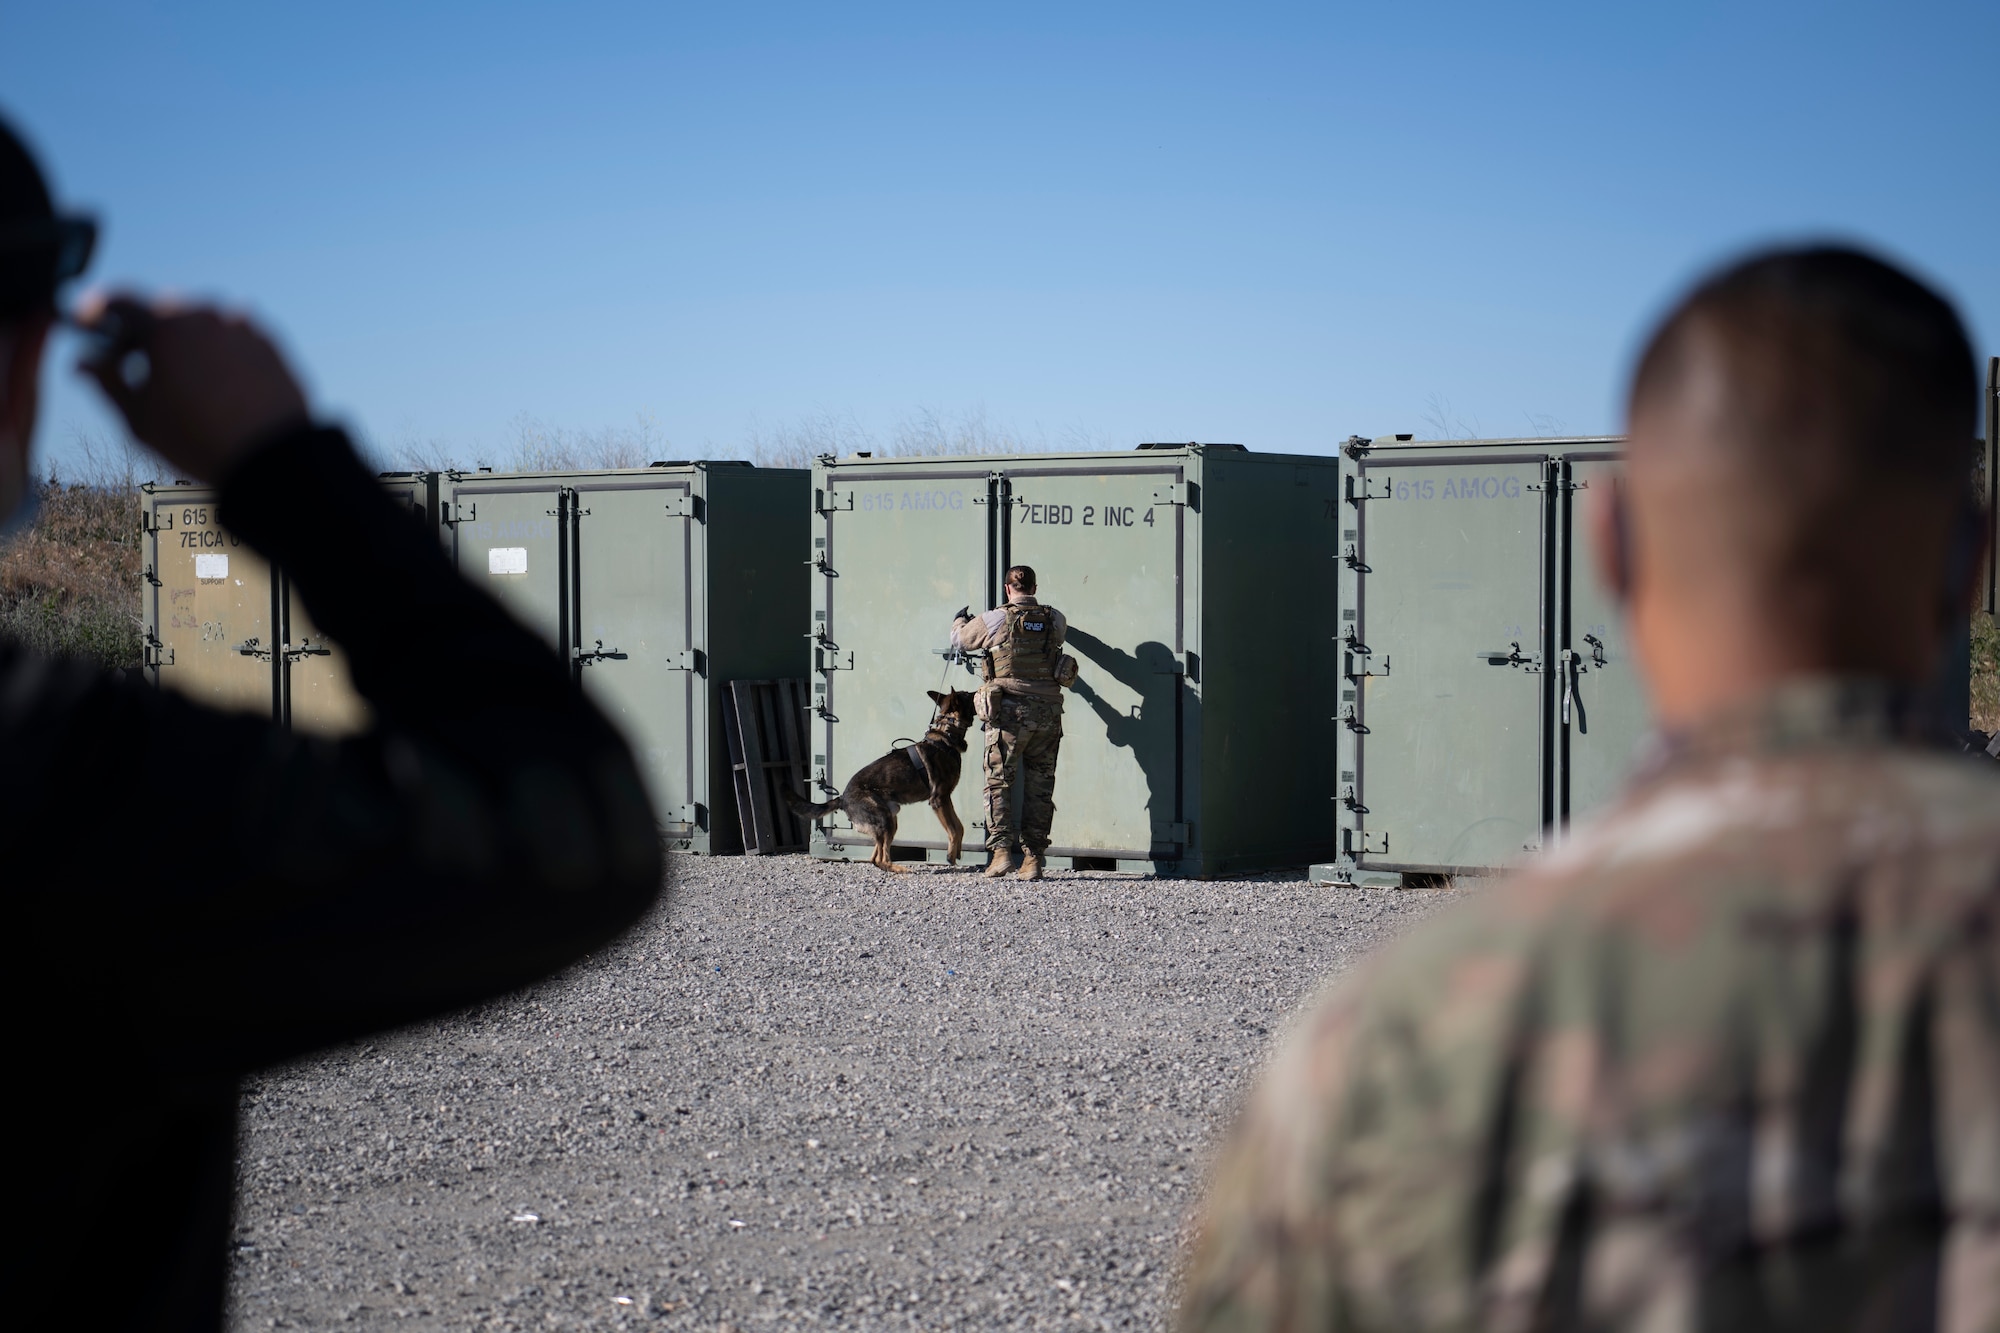 Airmen and dog search container